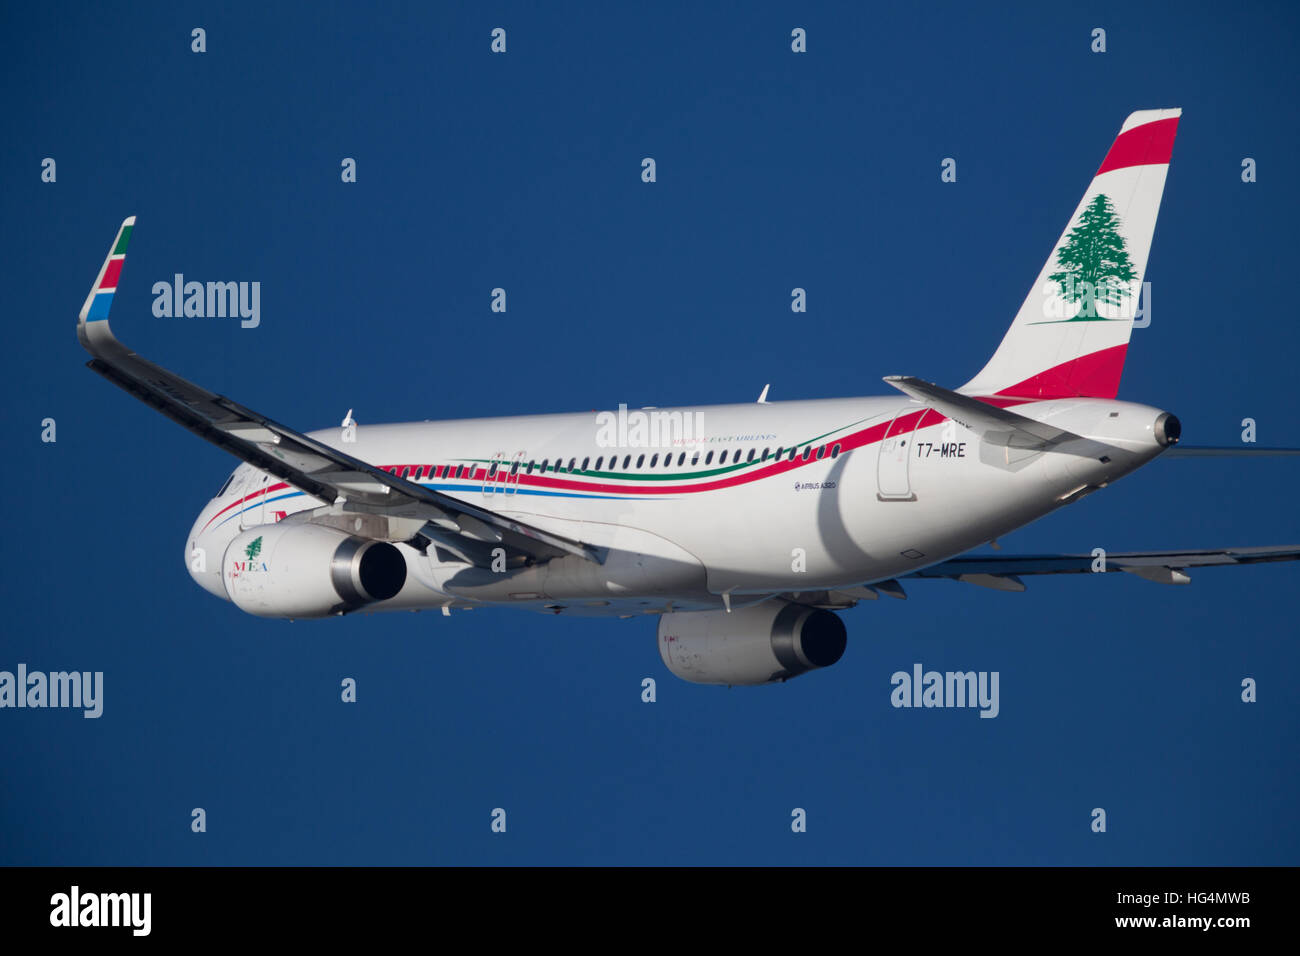 MEA Middle East Airlines Airbus A320 Banque D'Images